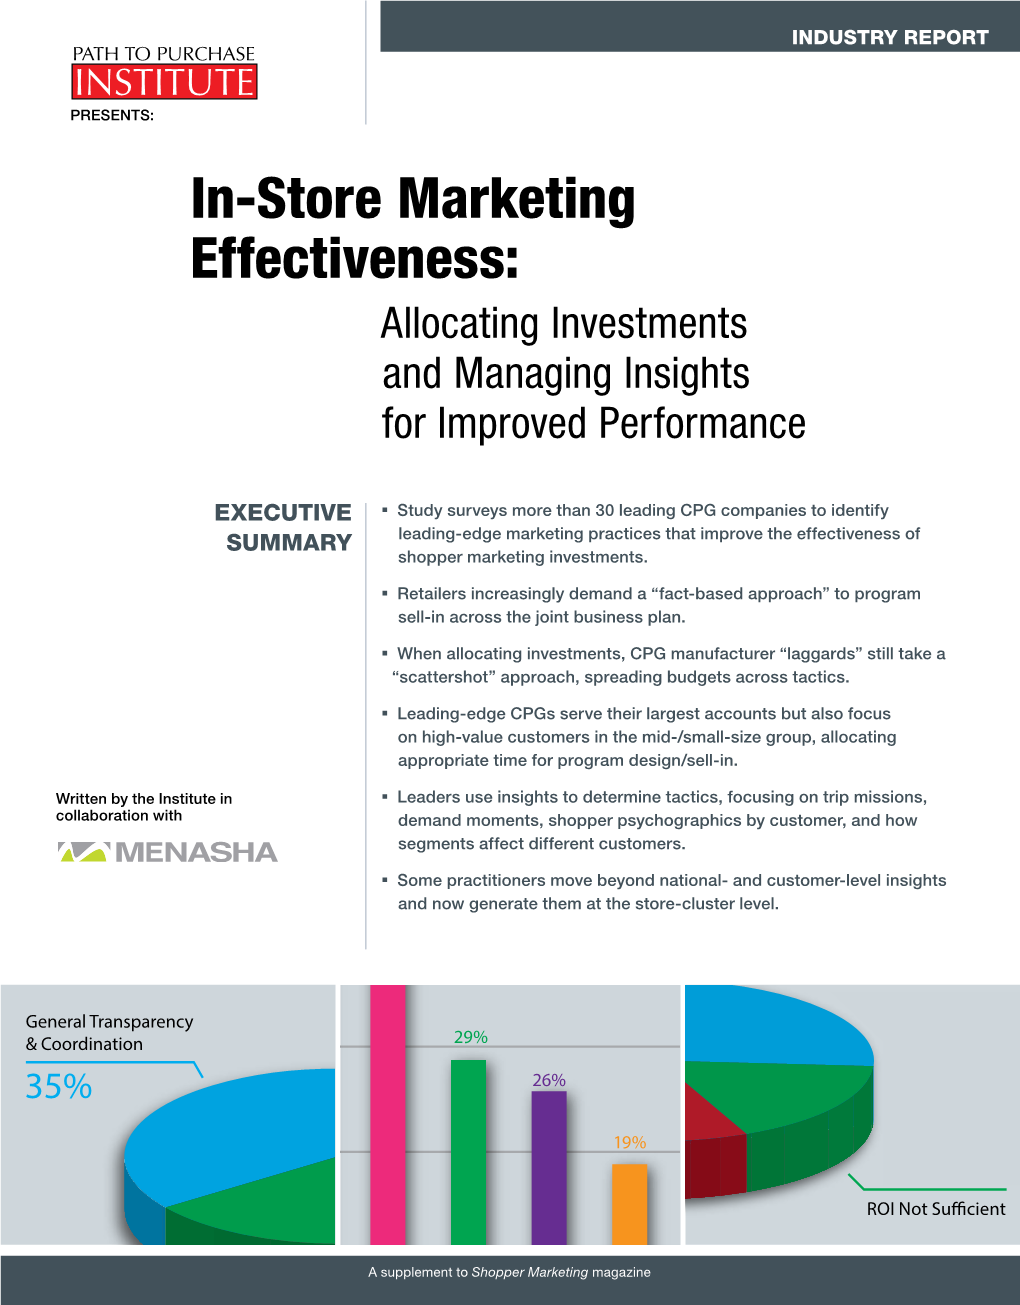 In-Store Marketing Effectiveness: Allocating Investments and Managing Insights for Improved Performance